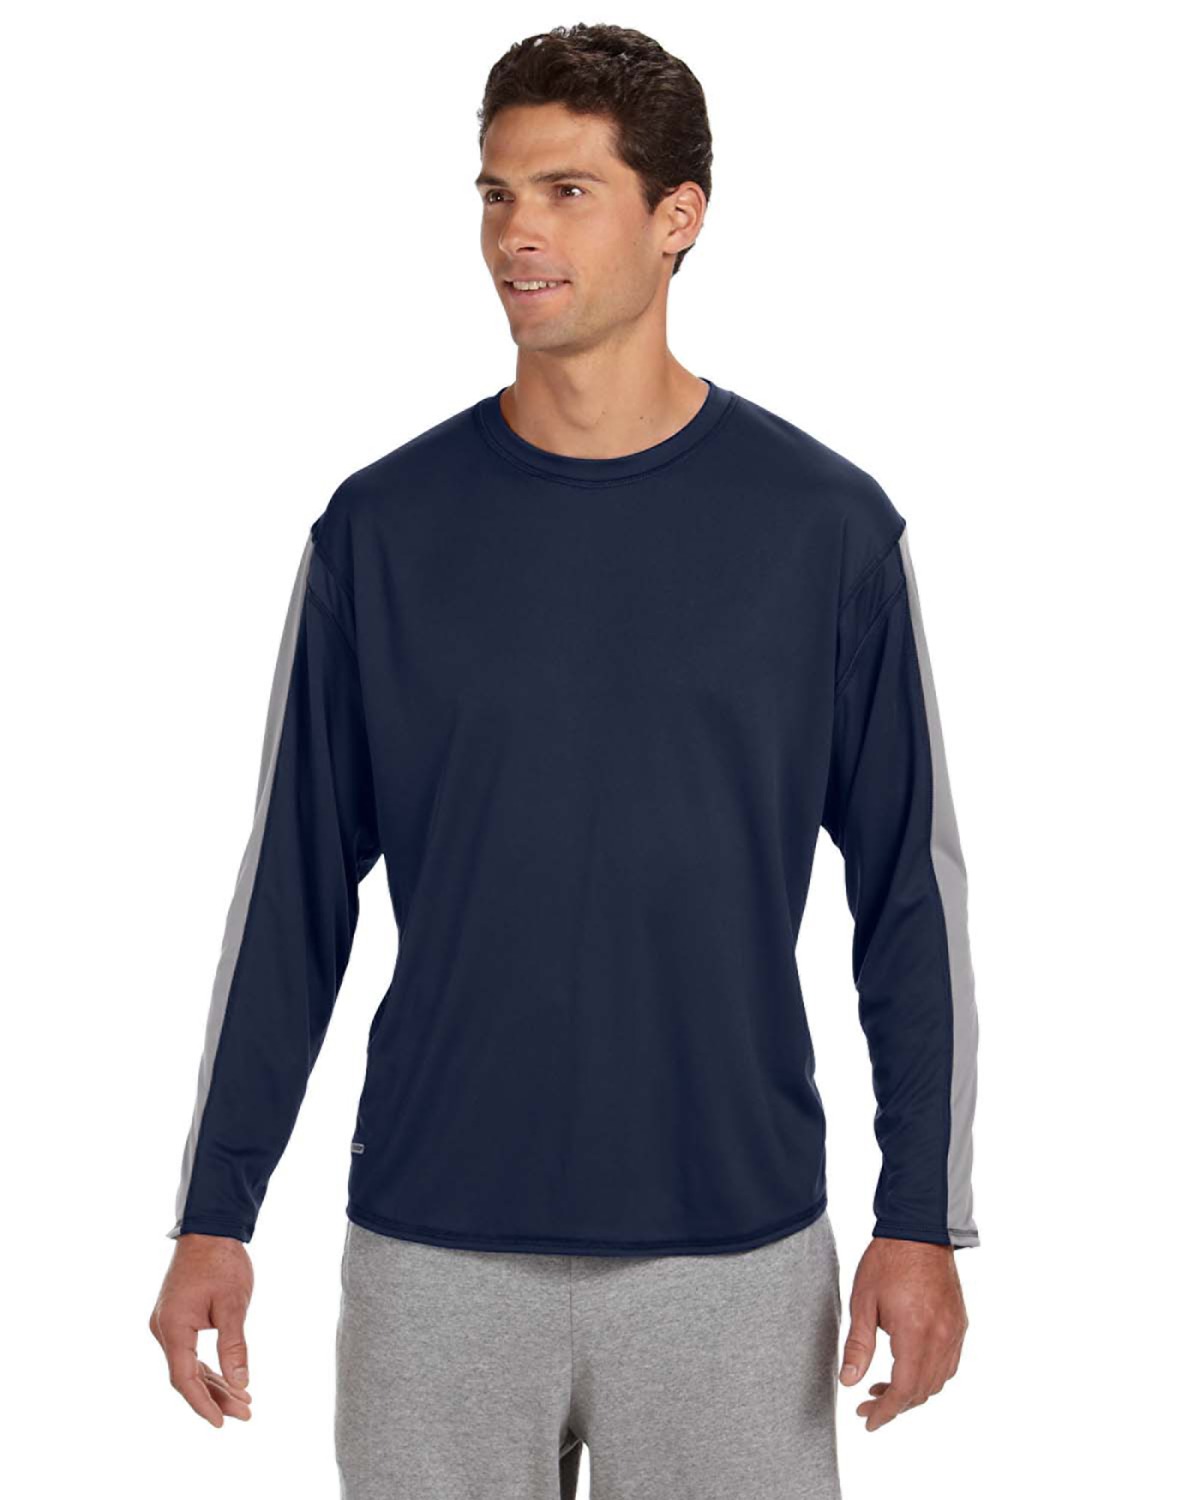 Russell Athletic 6B5DPM - Long-Sleeve Performance T-Shirt